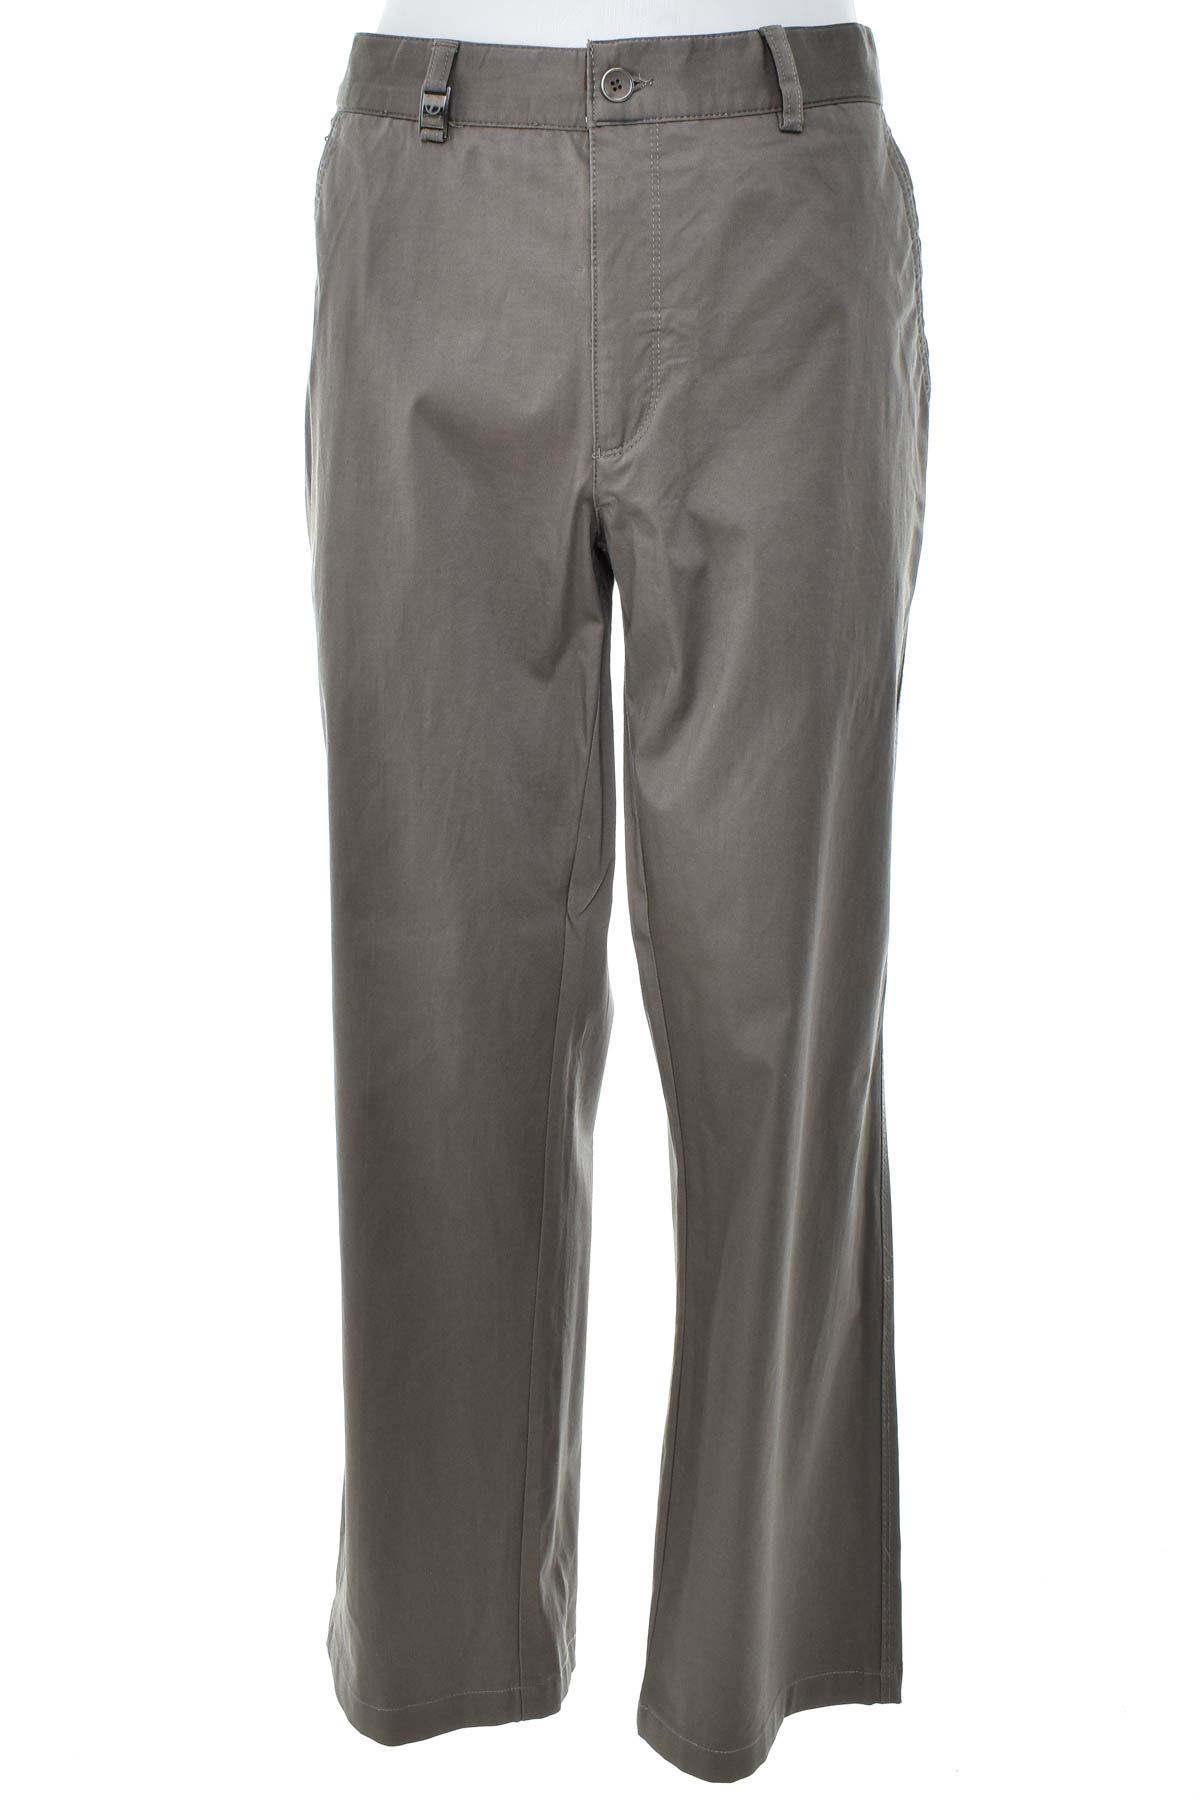 Men's trousers - Theorie - 0